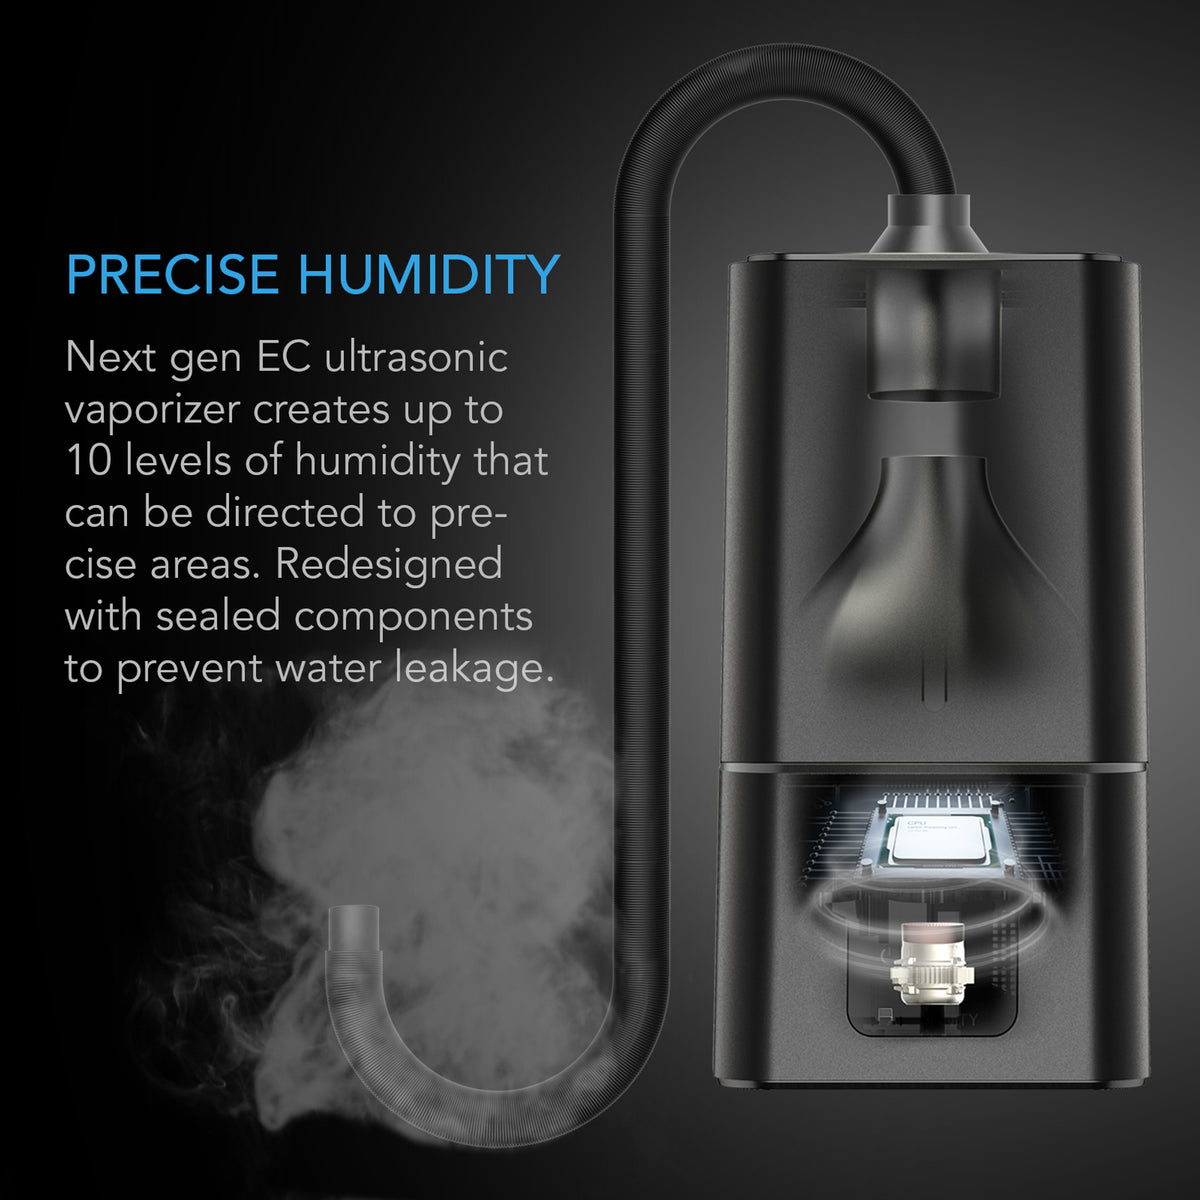 Precise humidity humidifier cloudforge